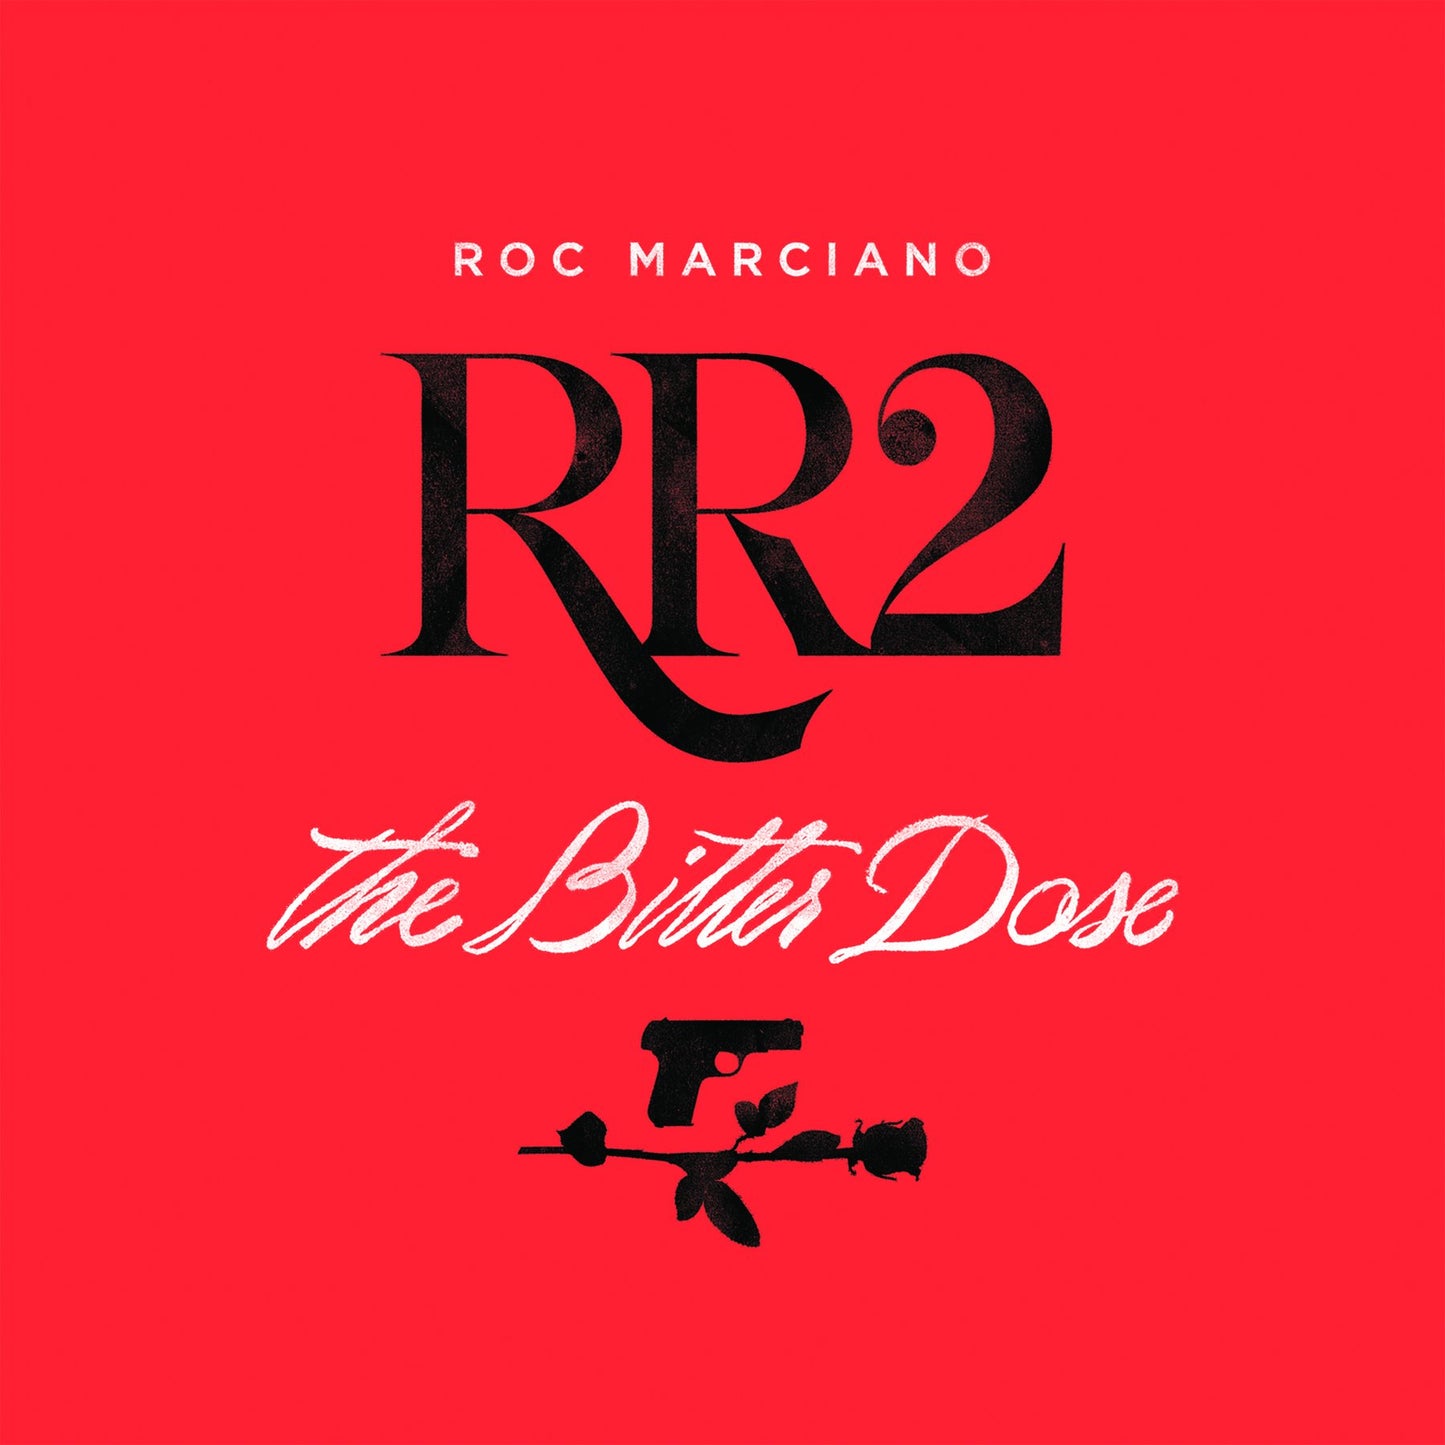 RR2 - The Bitter Dose (CD)